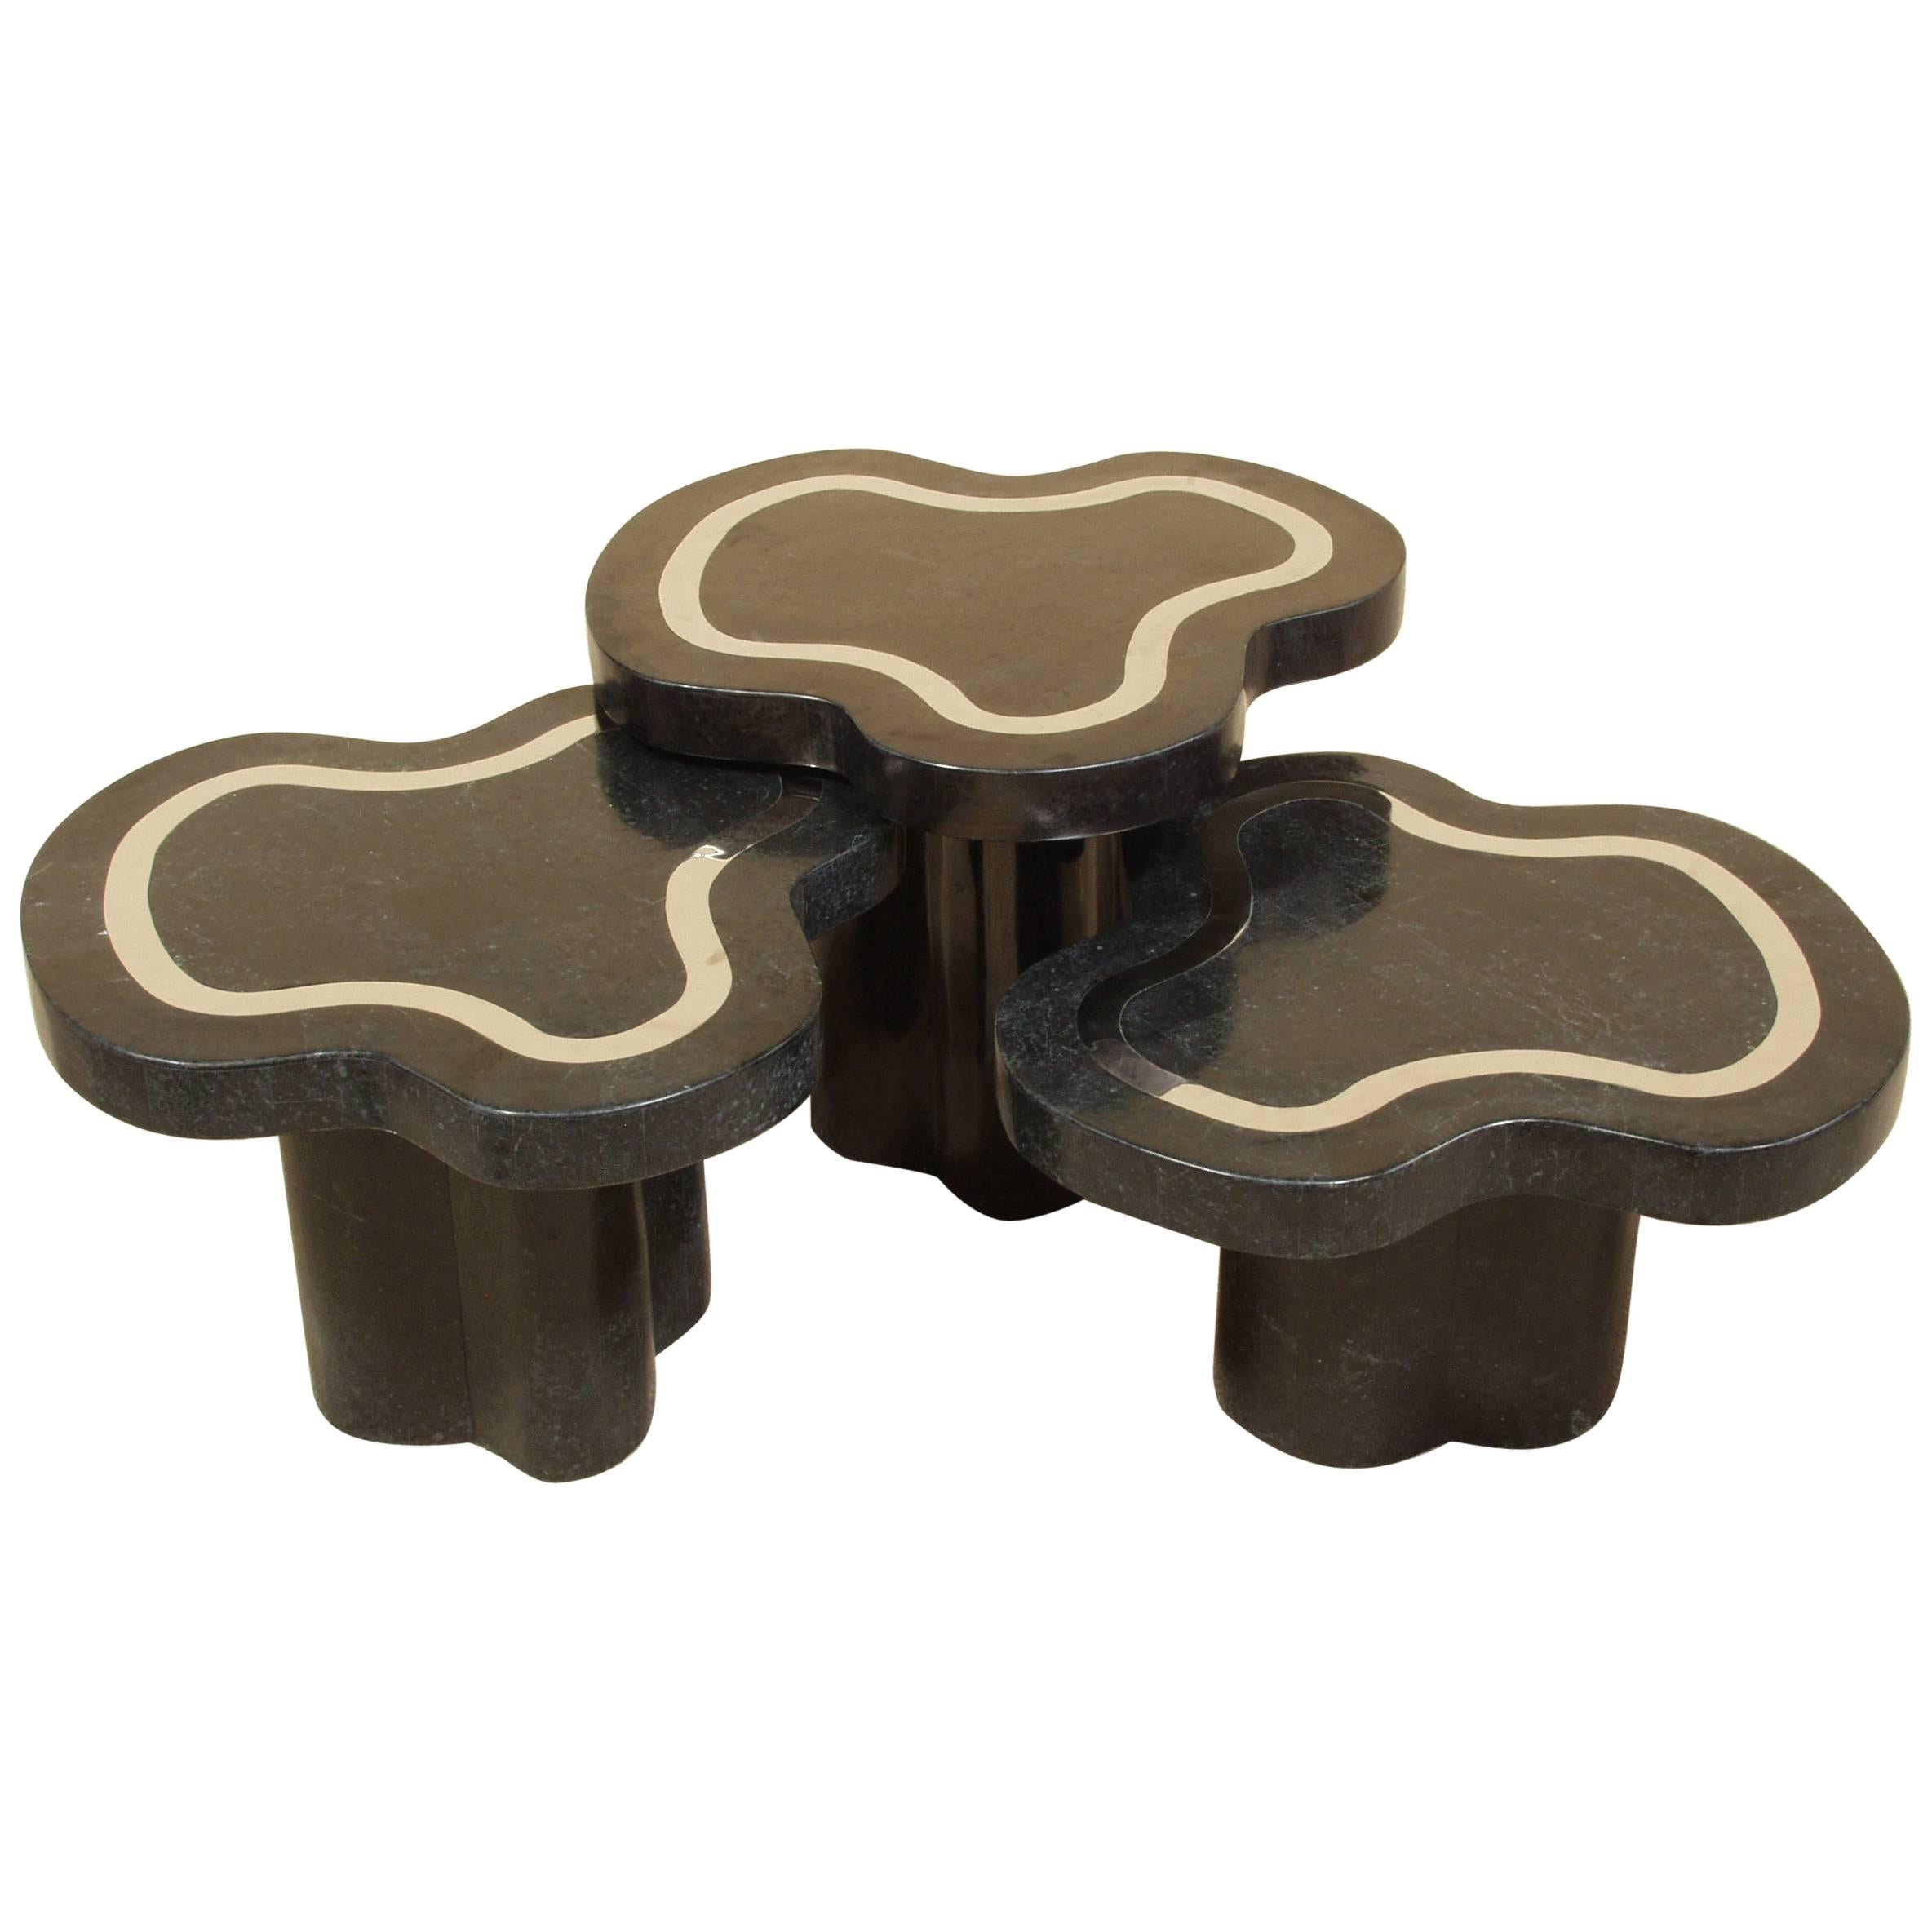 Water Mushroom Tables, Black Stone with Stainless Steel, Set of Three, 1990s For Sale